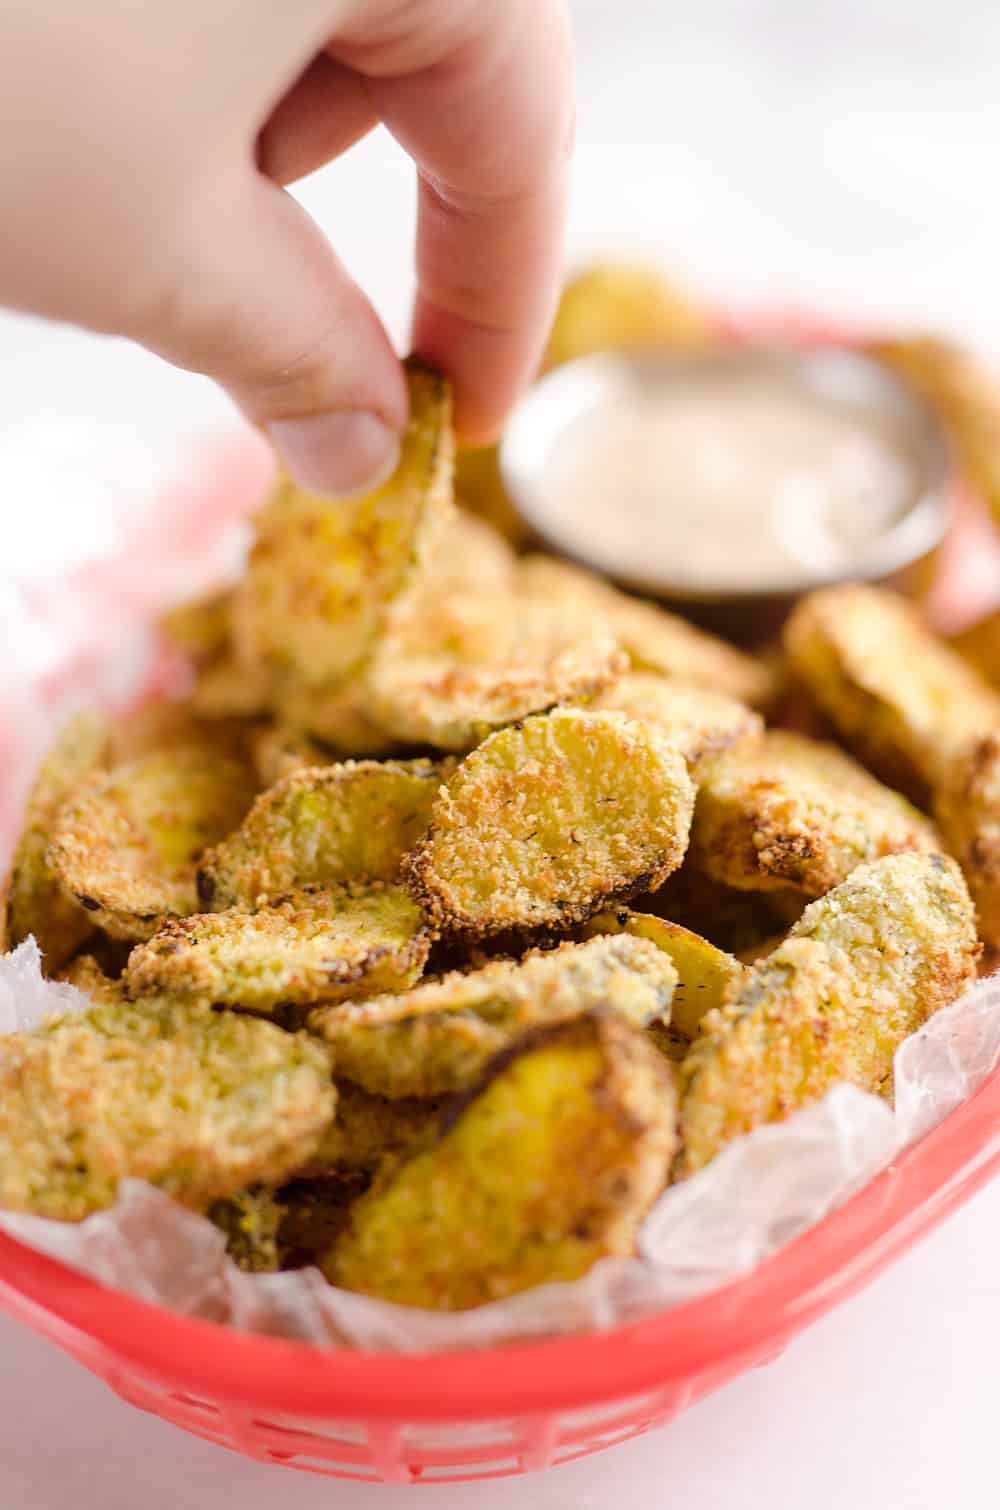 Airfryer Parmesan Dill Fried Pickle Chips are a quick and easy appetizer made extra crunchy in your Airfryer without all the fat from oil. This low-fat snack is sure to satisfy your craving for something salty!